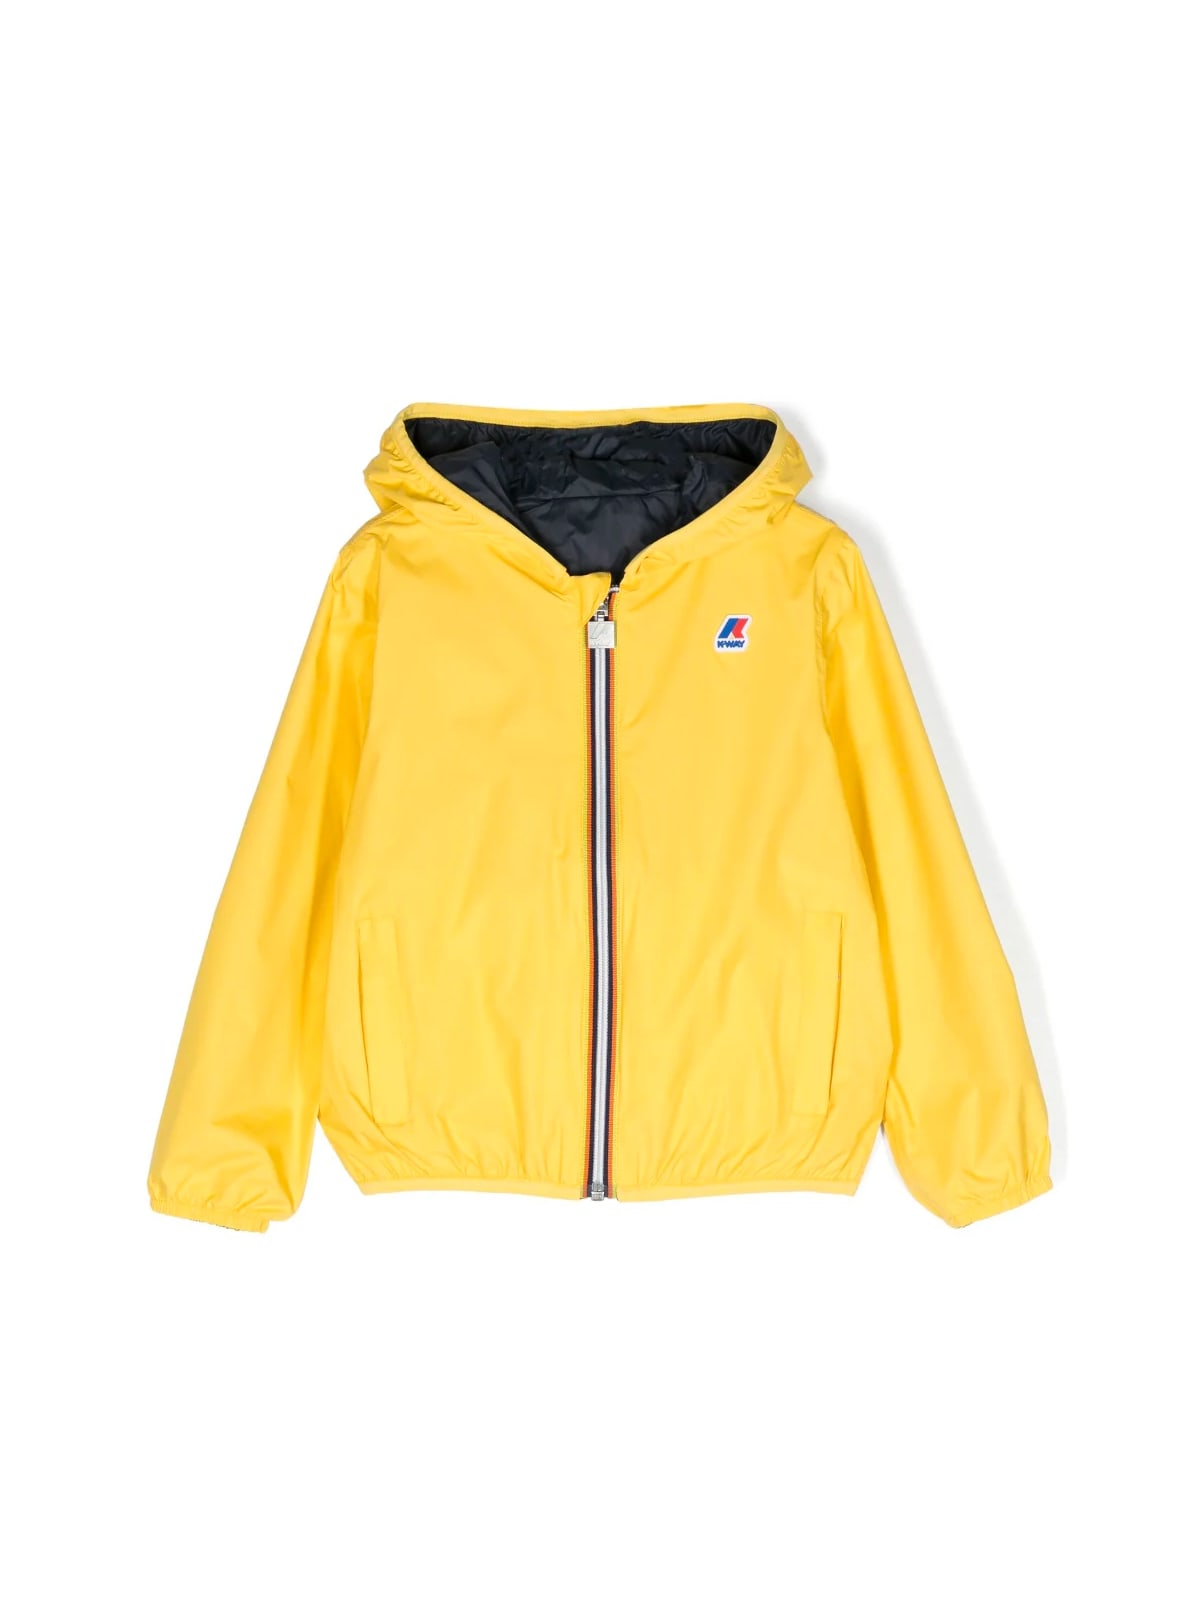 Shop K-way P. Jacques Plus 2 Double In Aly Yellow S Blue D